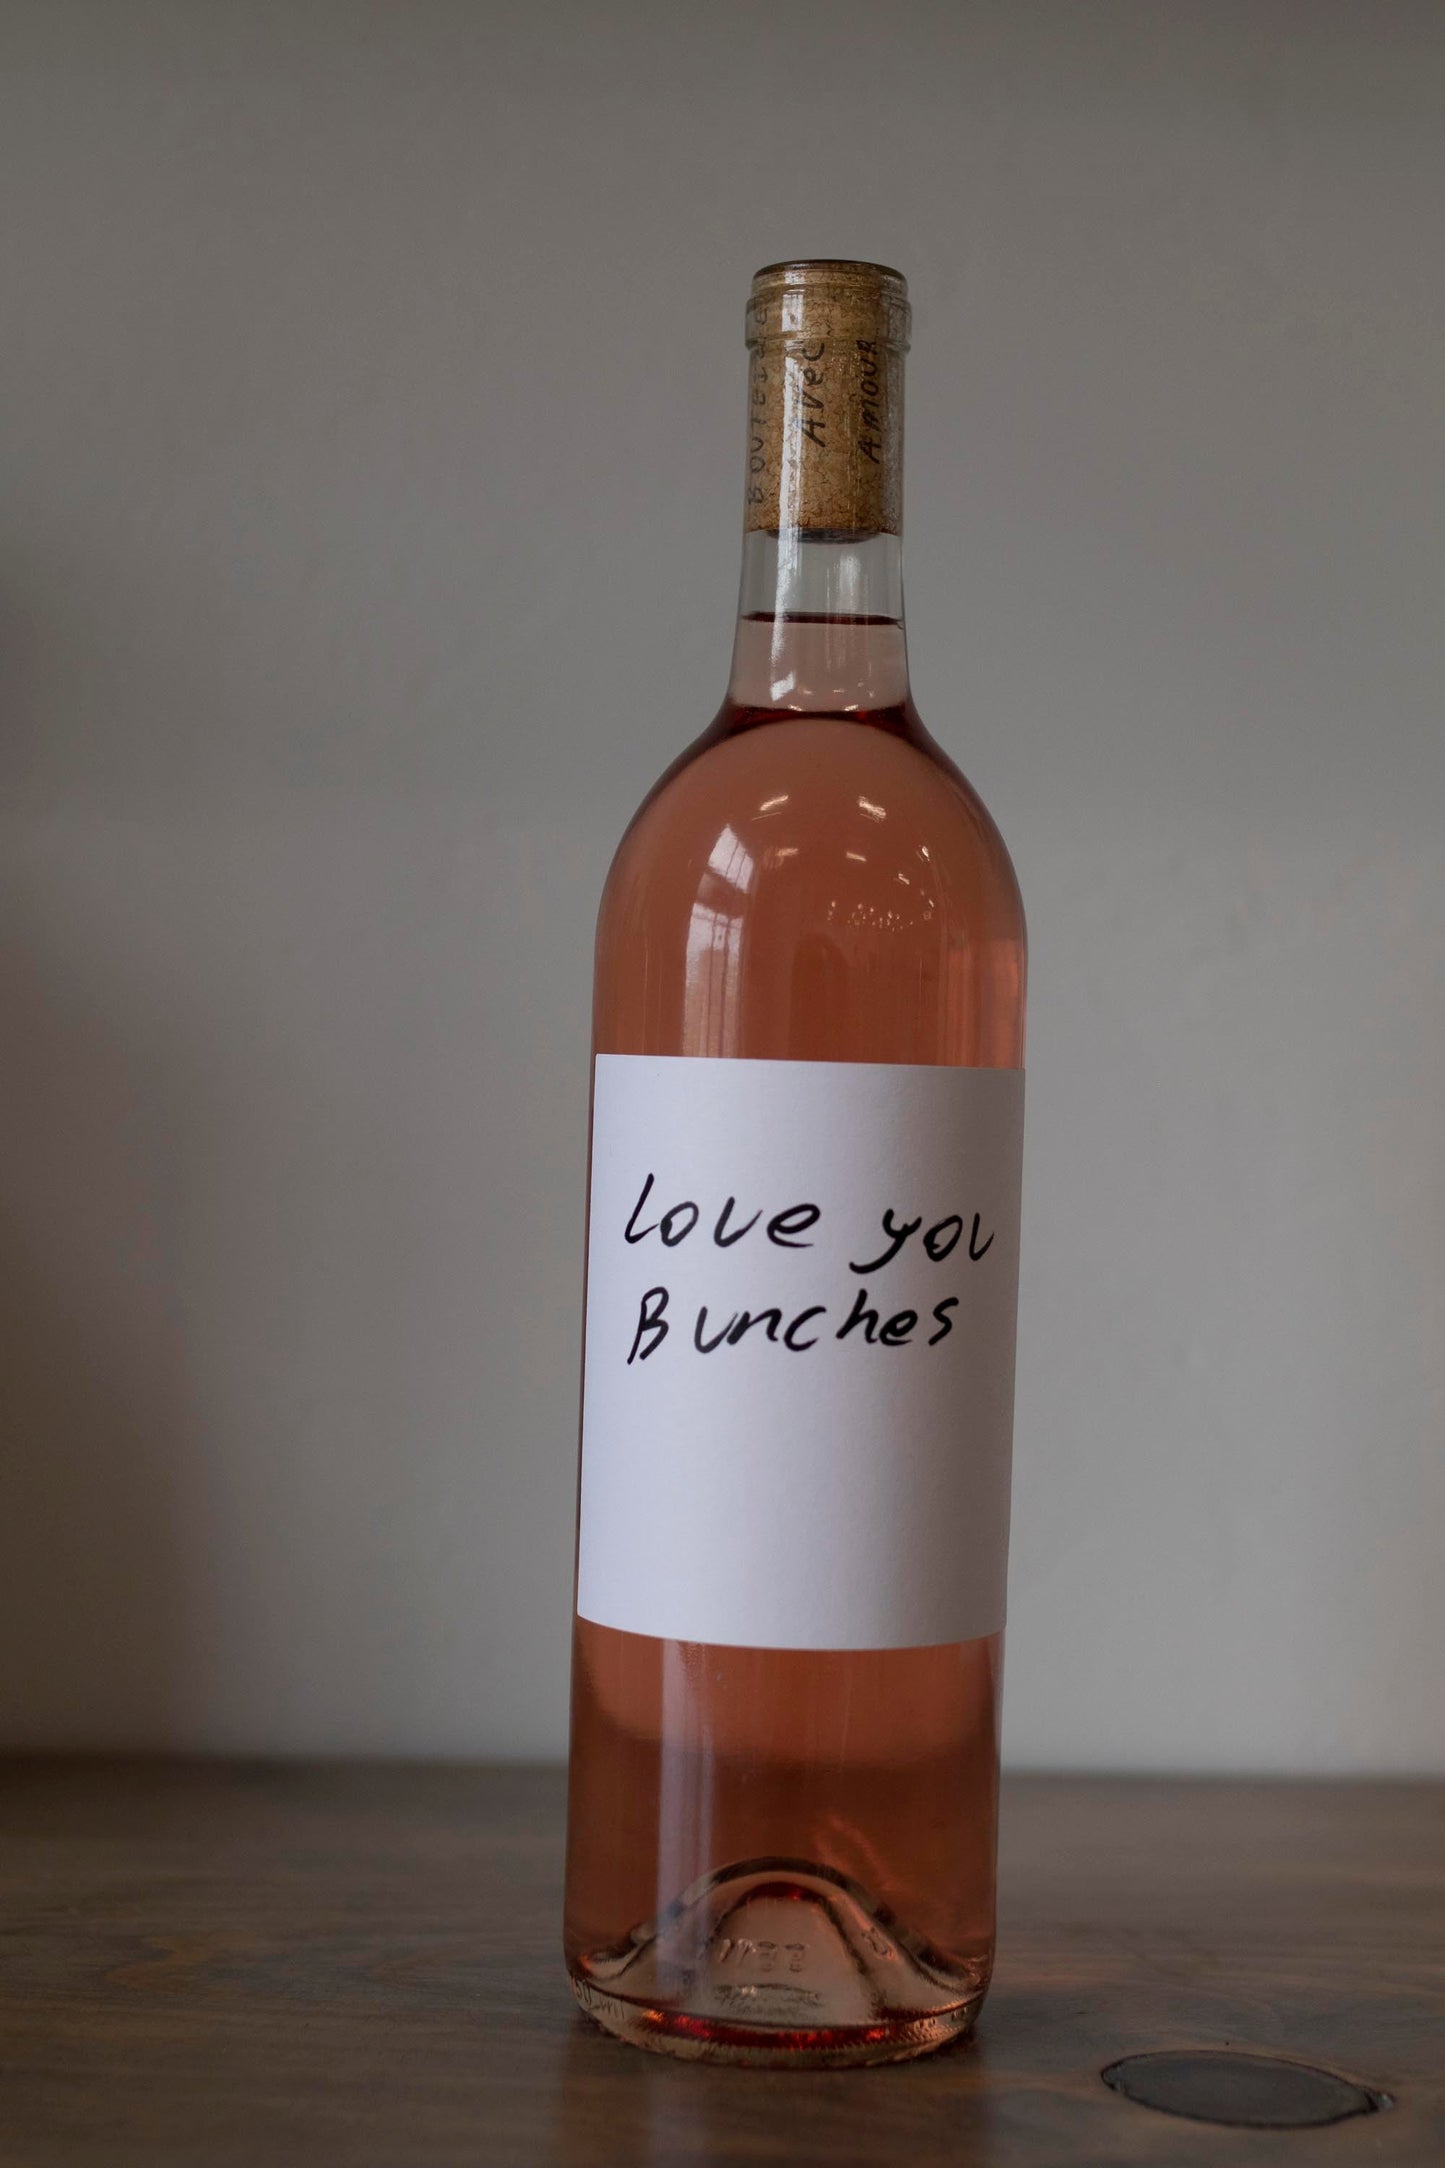 Bottle of Love you bunches rose found at Vine & Board in 3809 NW 166th St Suite 1, Edmond, OK 73012